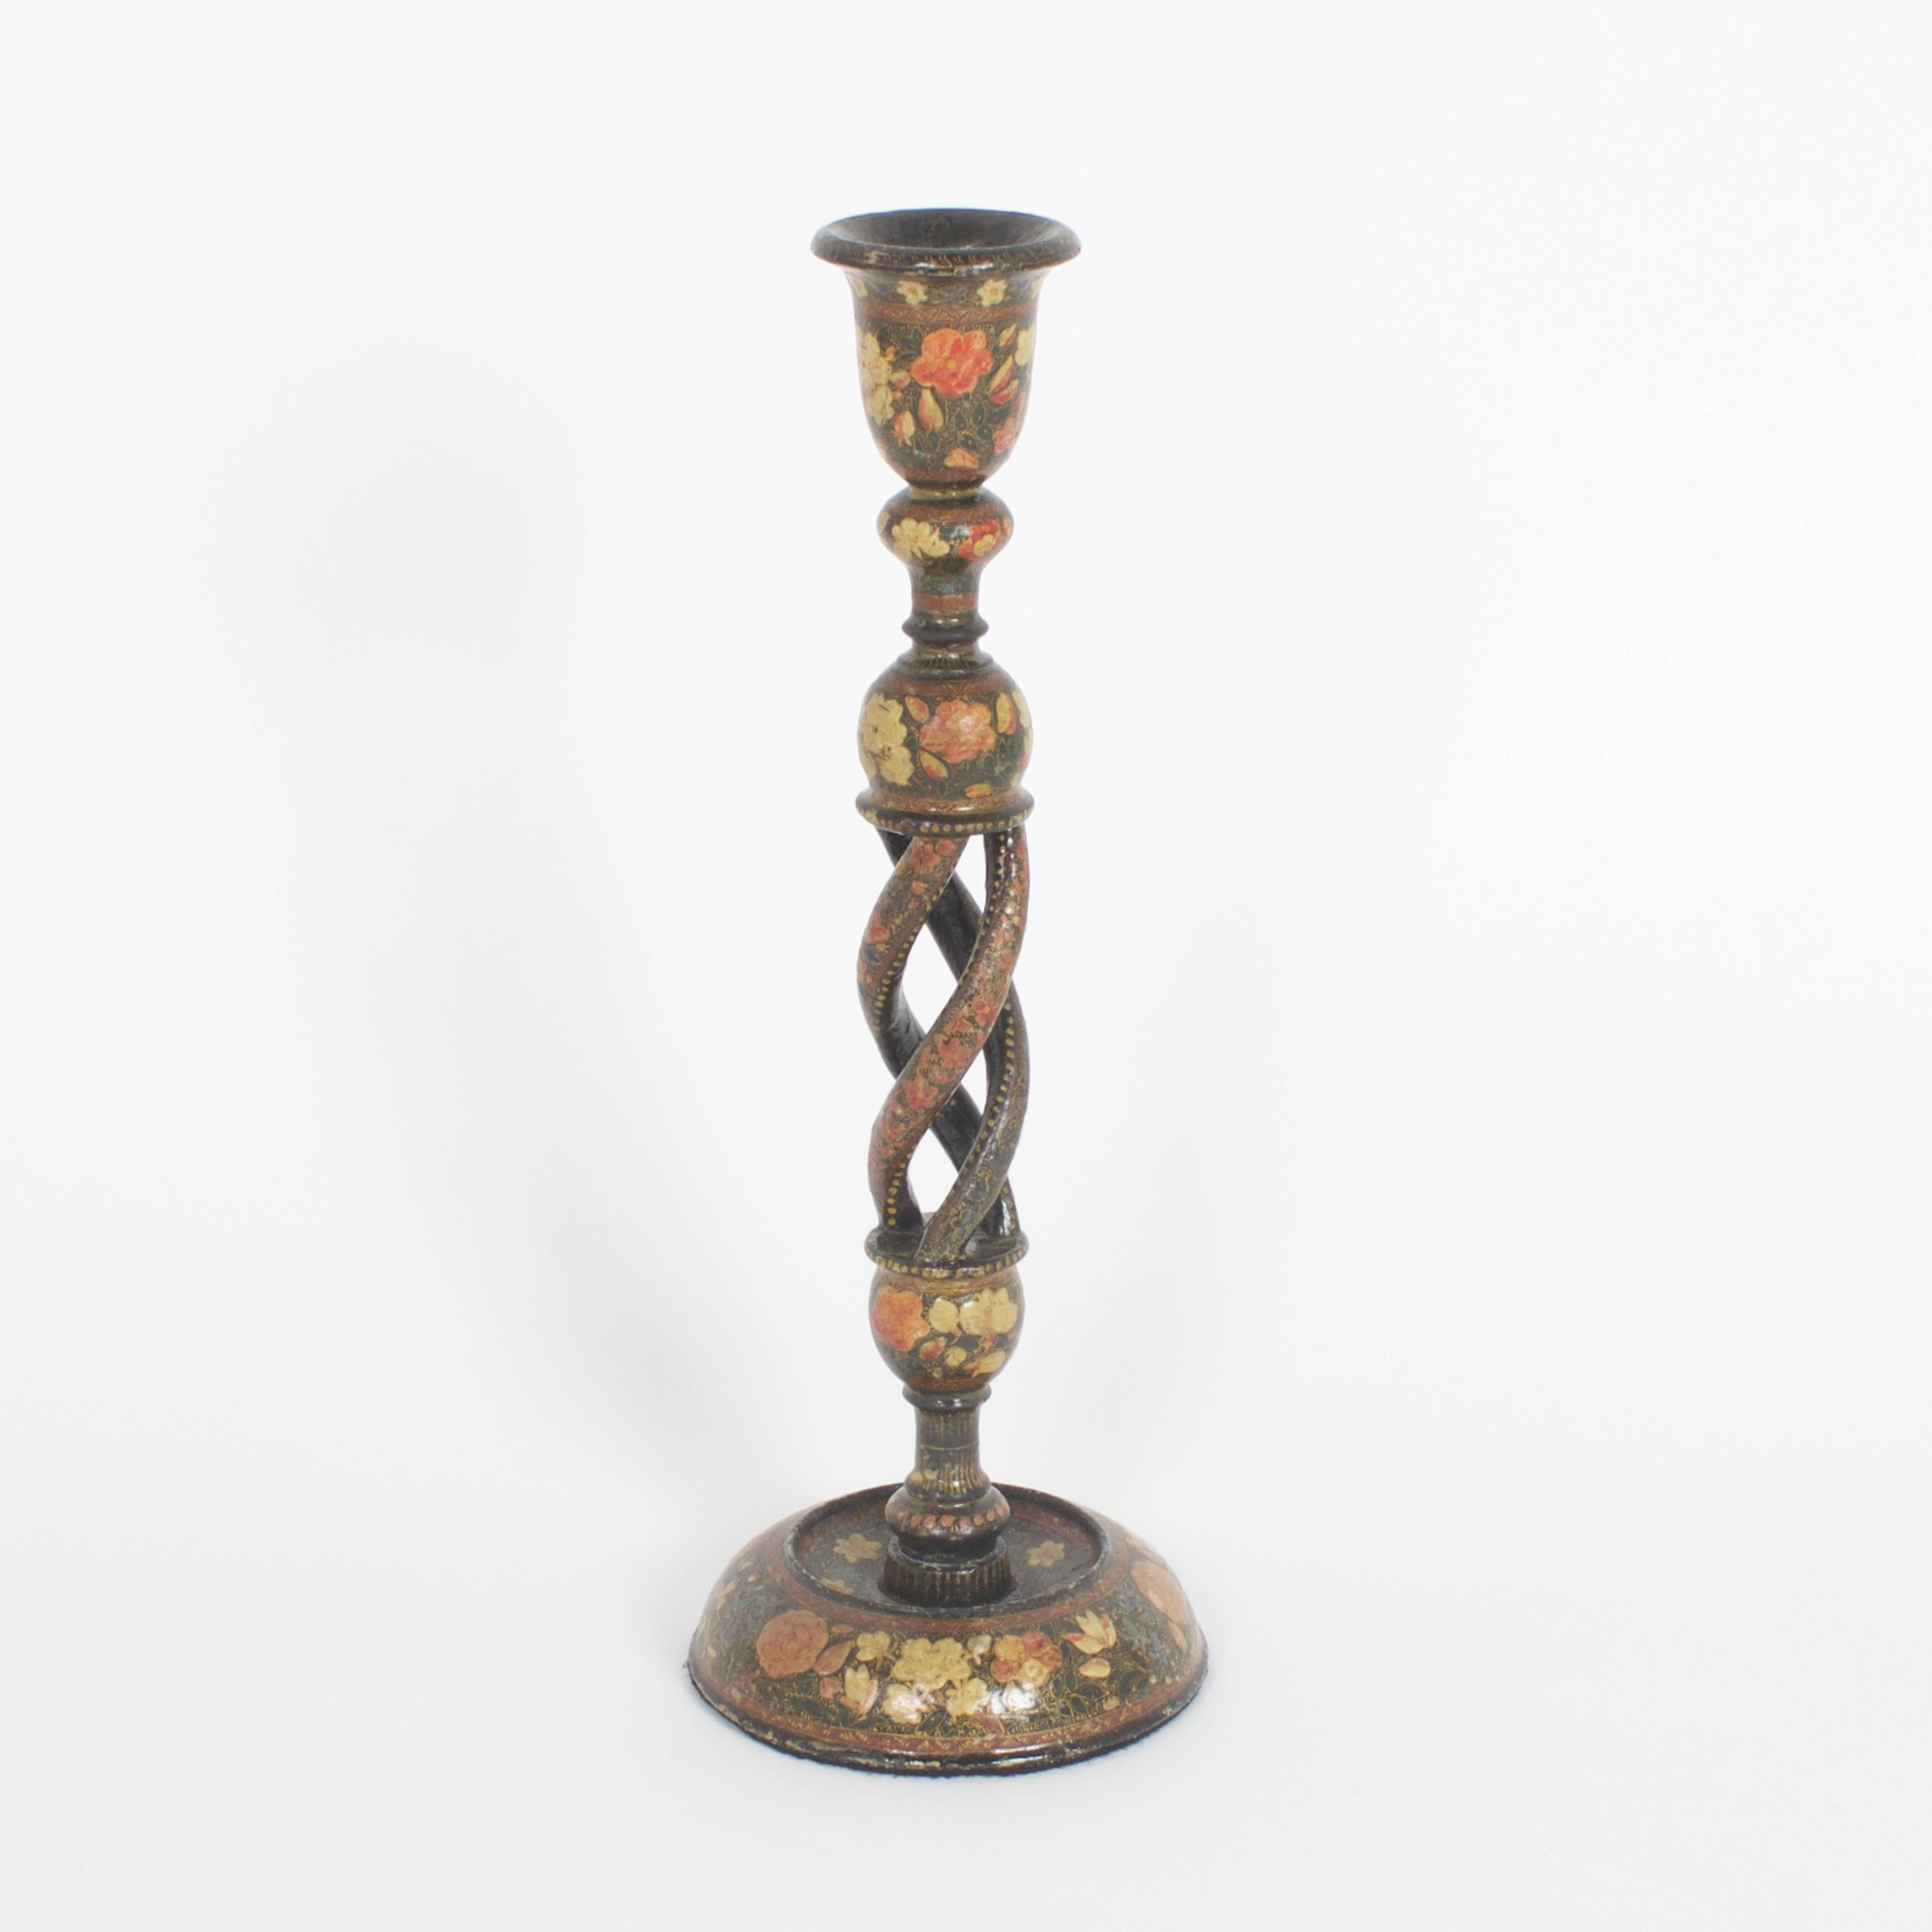 Pair of antique papier mâché and lacquer Kashmiri candlesticks with spiral stems and delicate painted floral decorations on a black background. A Classic Anglo-Indian form.

.
 